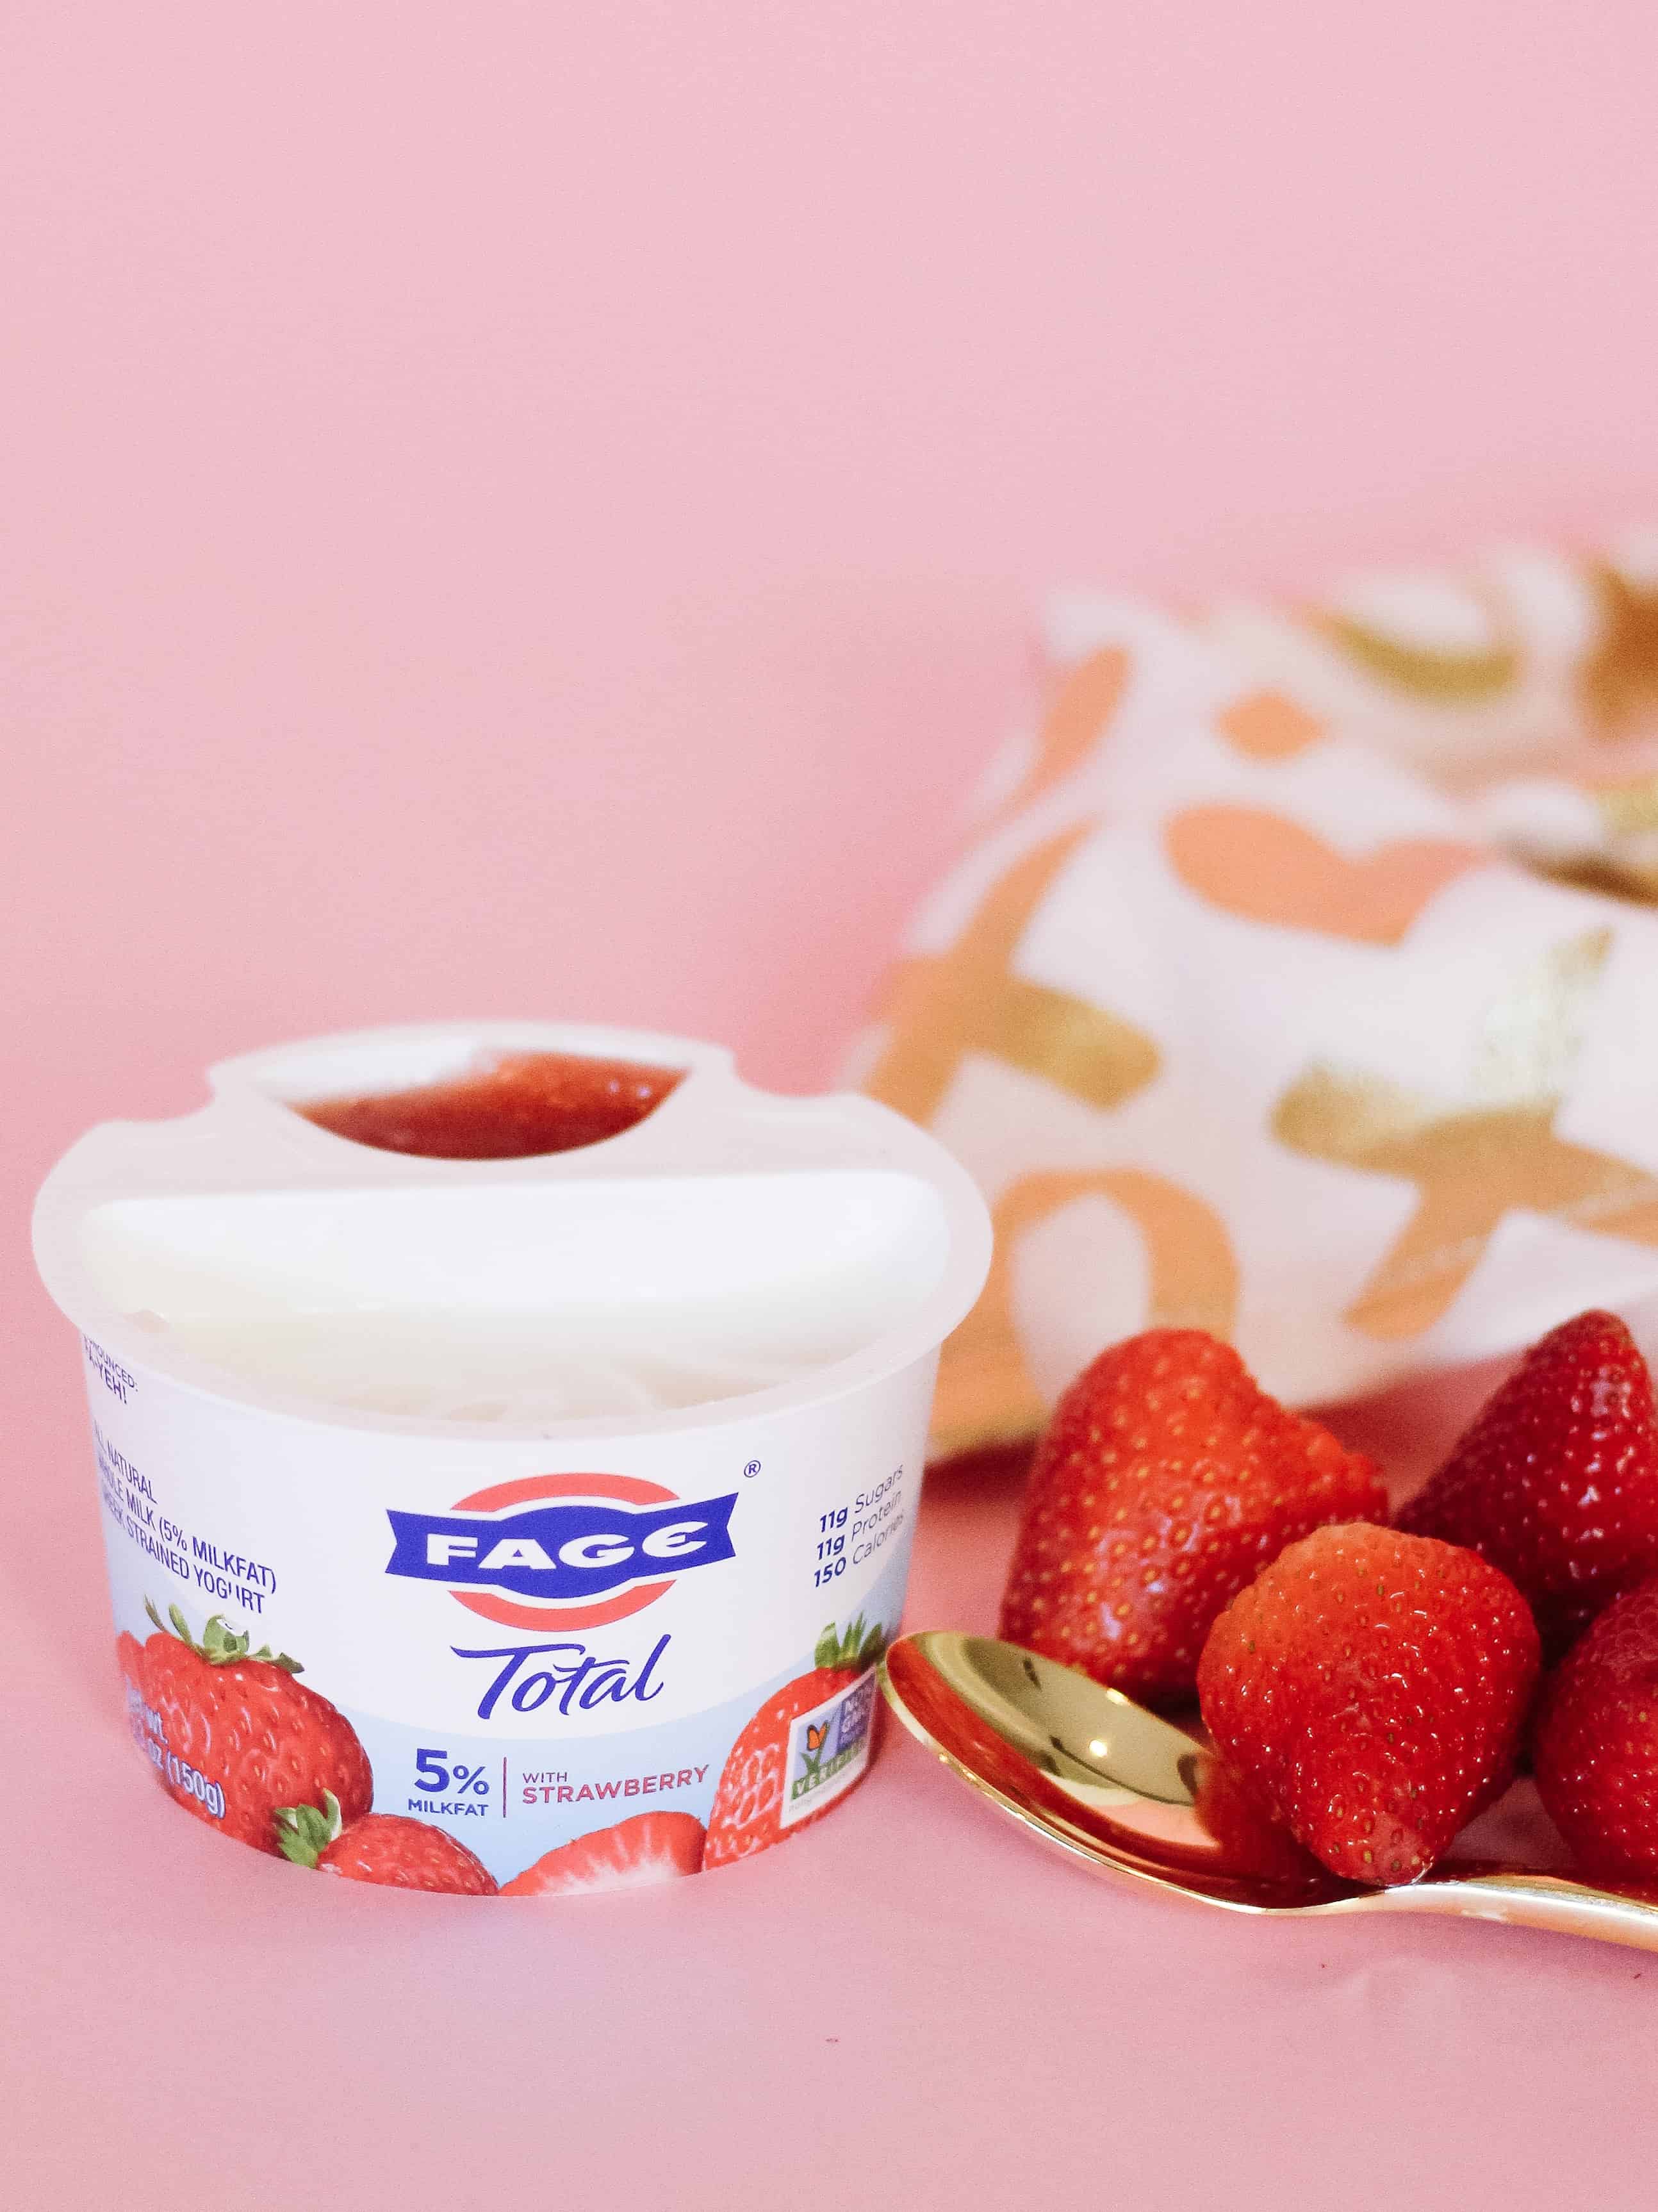 FAGE Total Split cup yogurt against pink background with gold spoon and strawberries